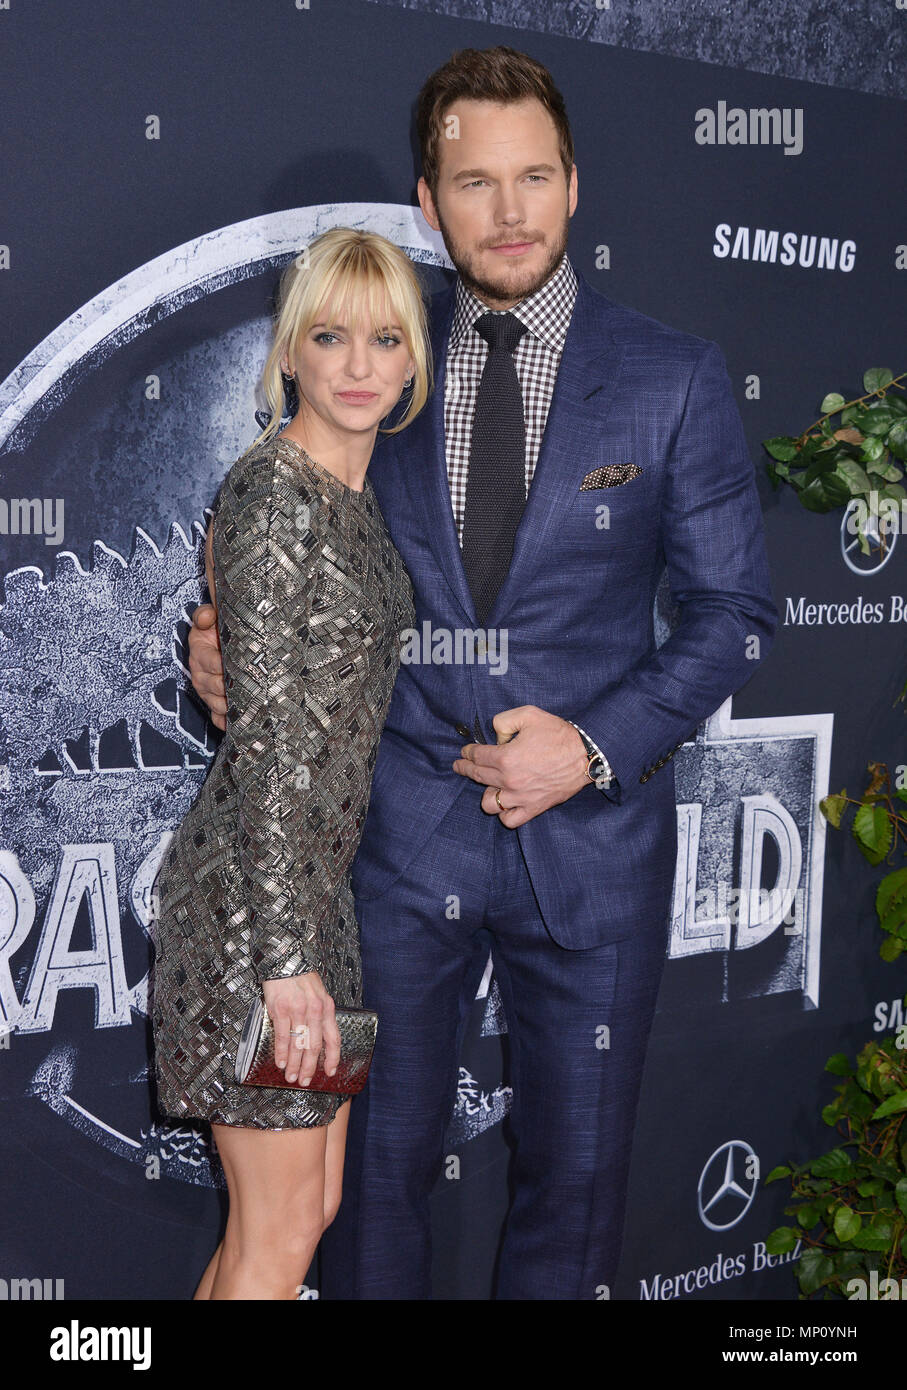 Anna Faris and Chris Pratt 103 at the Jurassic World Premiere at the Hollywood and Highland, Dolby Theatre in Los Angeles.. June, 9, 2015.Anna Faris and Chris Pratt 103 ------------- Red Carpet Event, Vertical, USA, Film Industry, Celebrities,  Photography, Bestof, Arts Culture and Entertainment, Topix Celebrities fashion /  Vertical, Best of, Event in Hollywood Life - California,  Red Carpet and backstage, USA, Film Industry, Celebrities,  movie celebrities, TV celebrities, Music celebrities, Photography, Bestof, Arts Culture and Entertainment,  Topix, vertical,  family from from the year , 2 Stock Photo